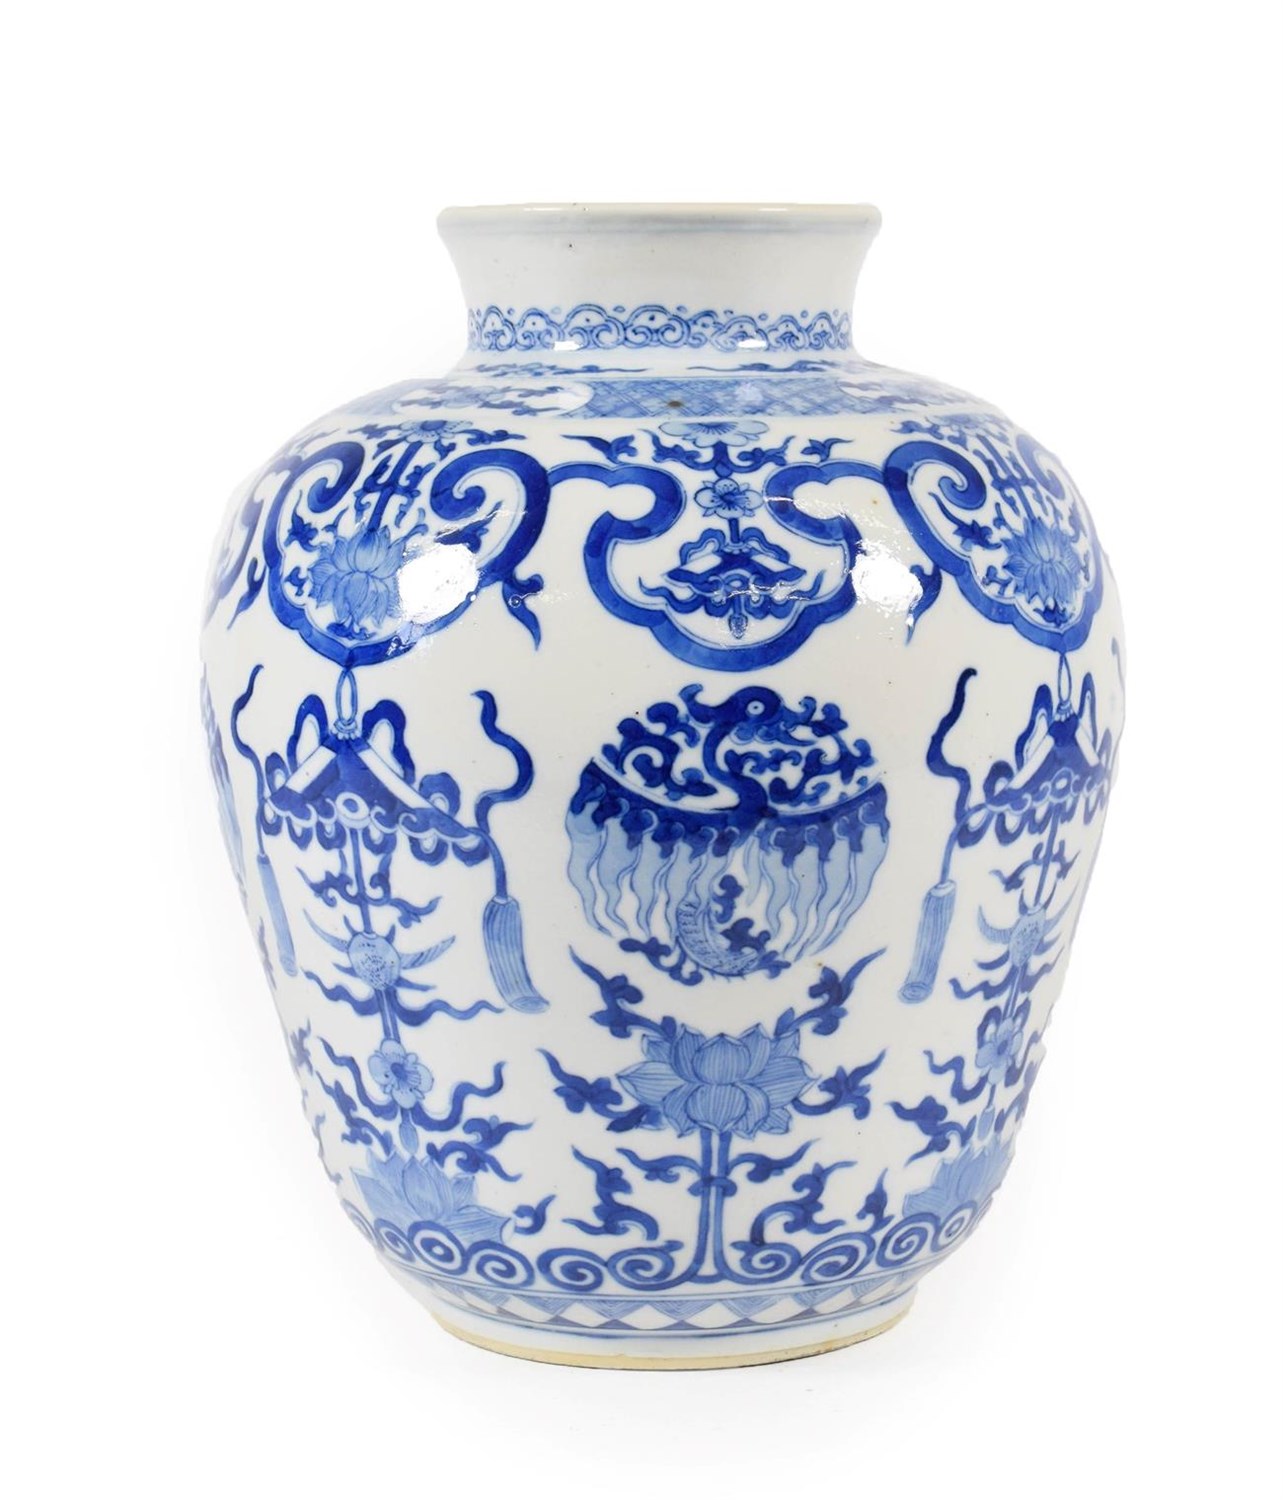 Lot 72 - A Chinese Porcelain Jar, Kangxi reign mark and probably of the period, of ovoid baluster form...